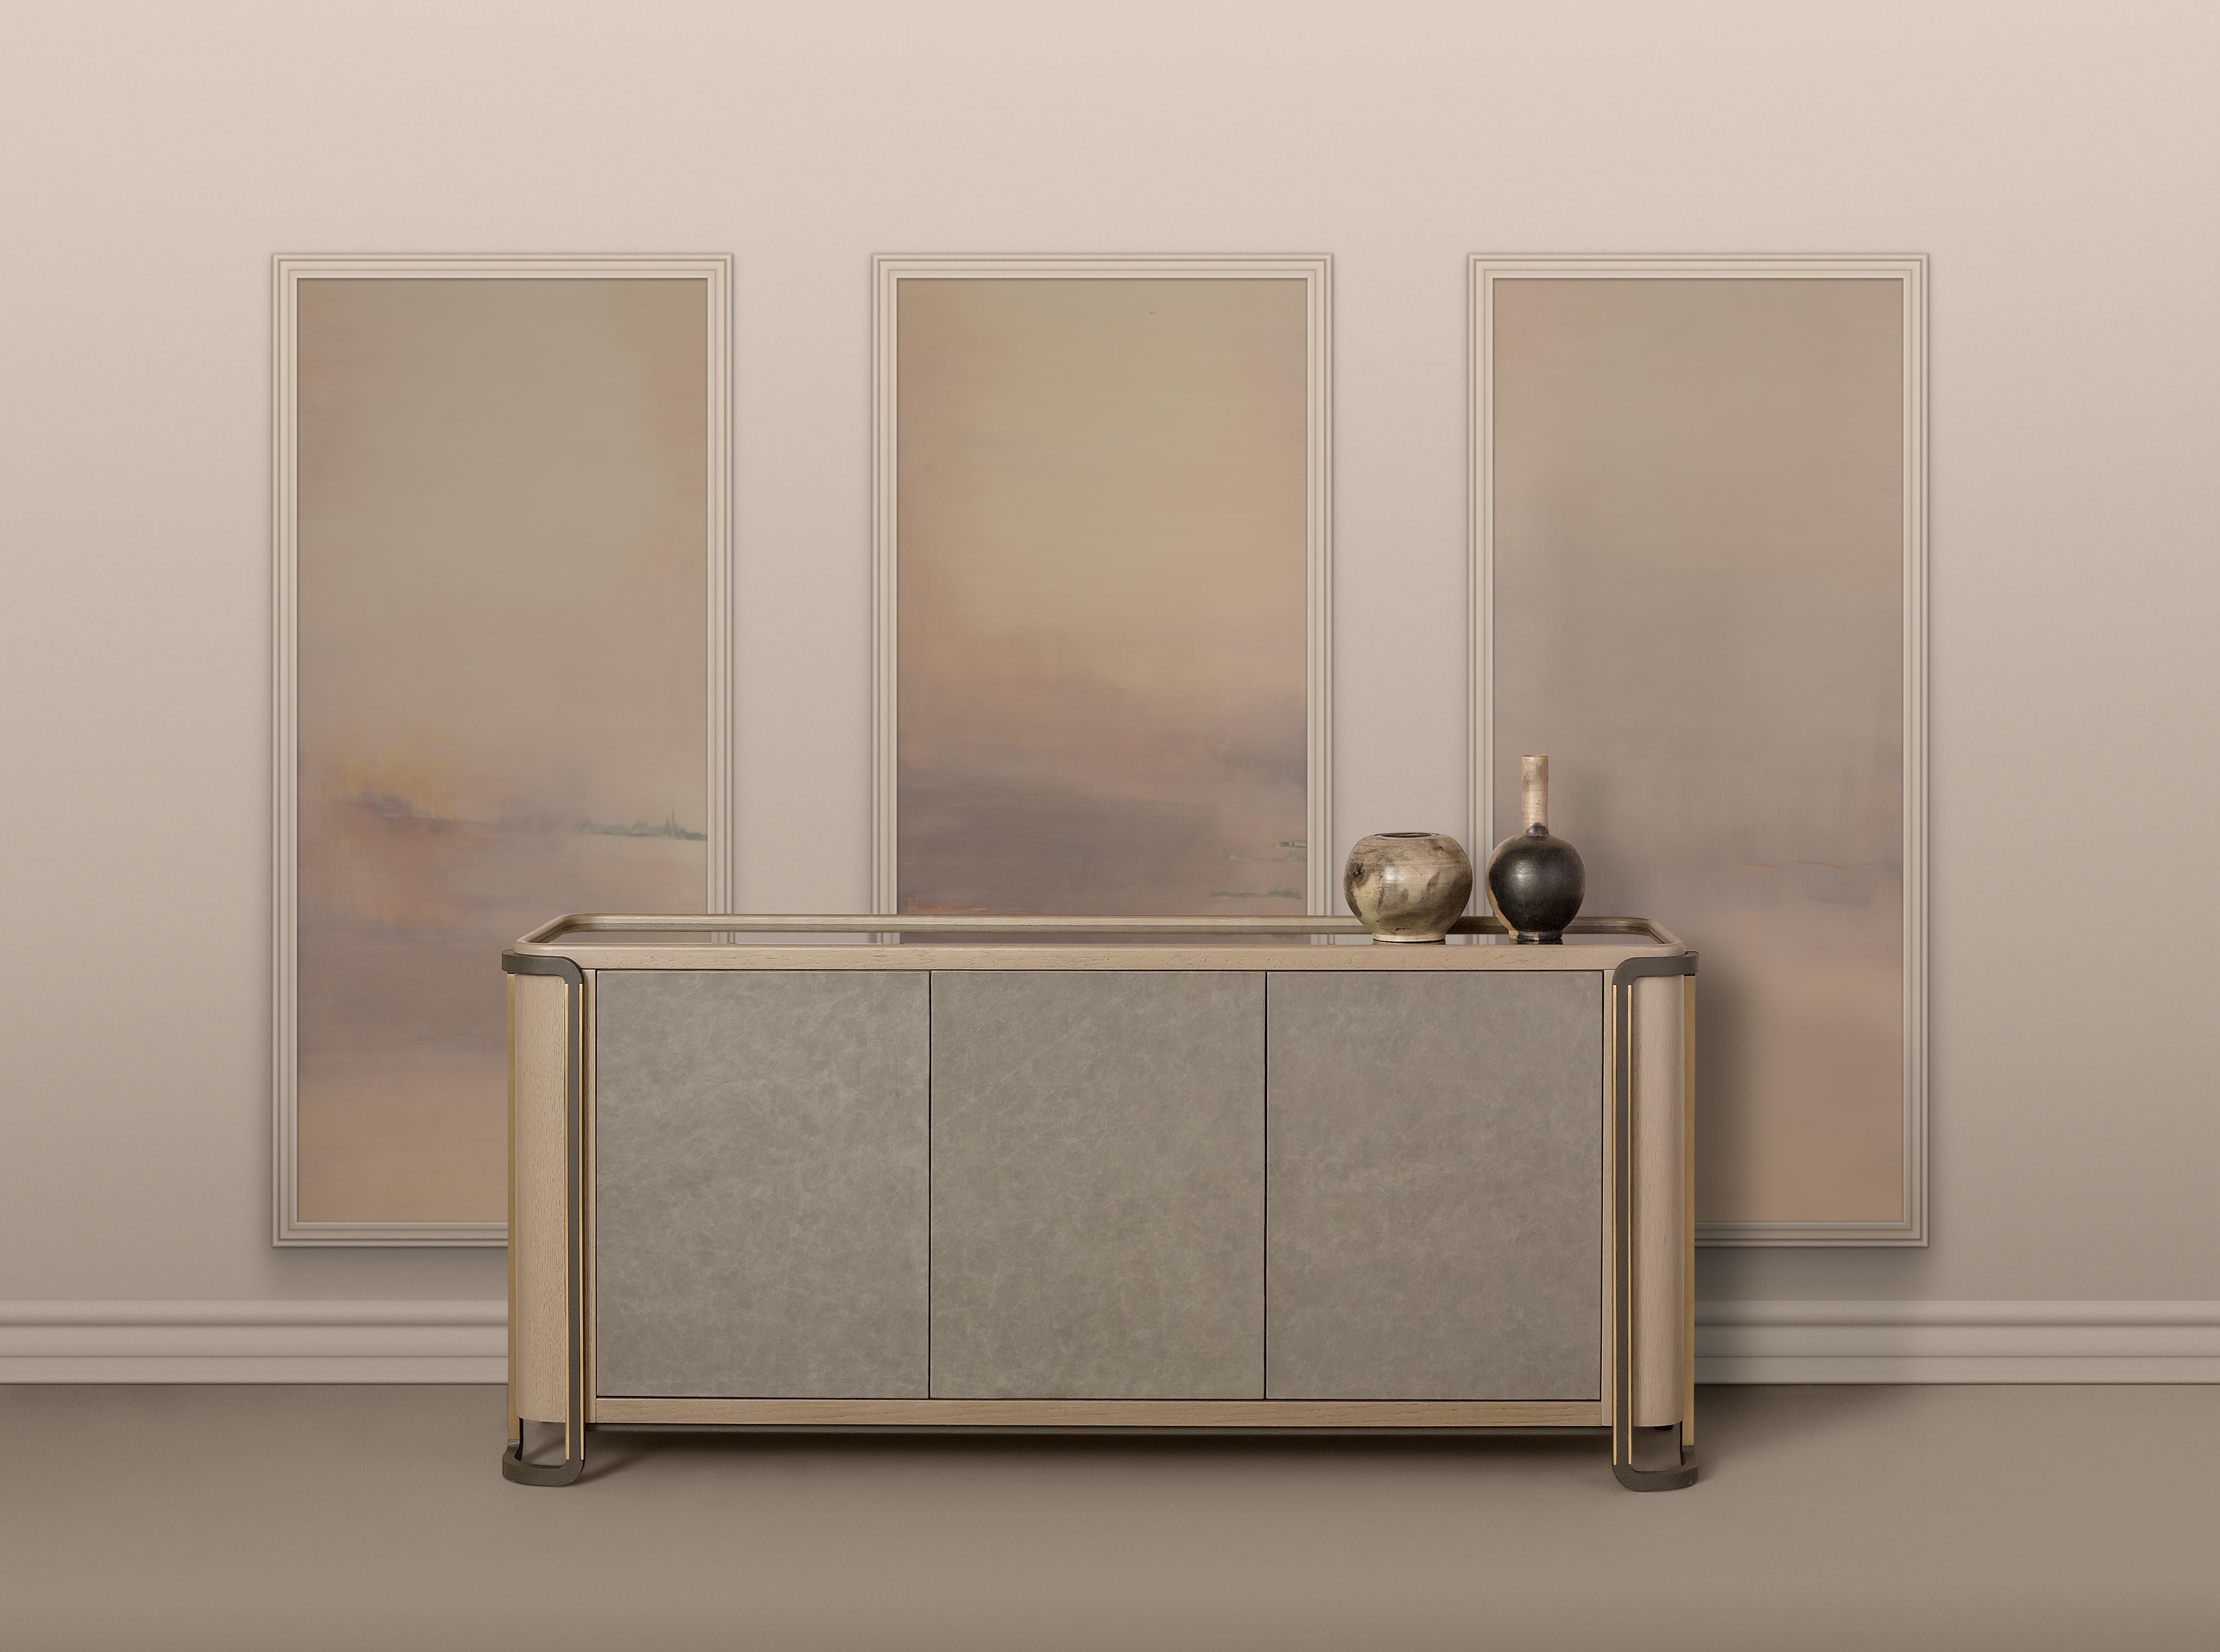 Unique Yaprak sideboard by Ekin Varon
Dimensions: W 200 x D 50 x 90 H
Materials: Wood Veneer, Glass.
Custom materials, sizing and finishes available as item is made to order.

Ekin Varon is the founder and creative director of Ekin Varon Design